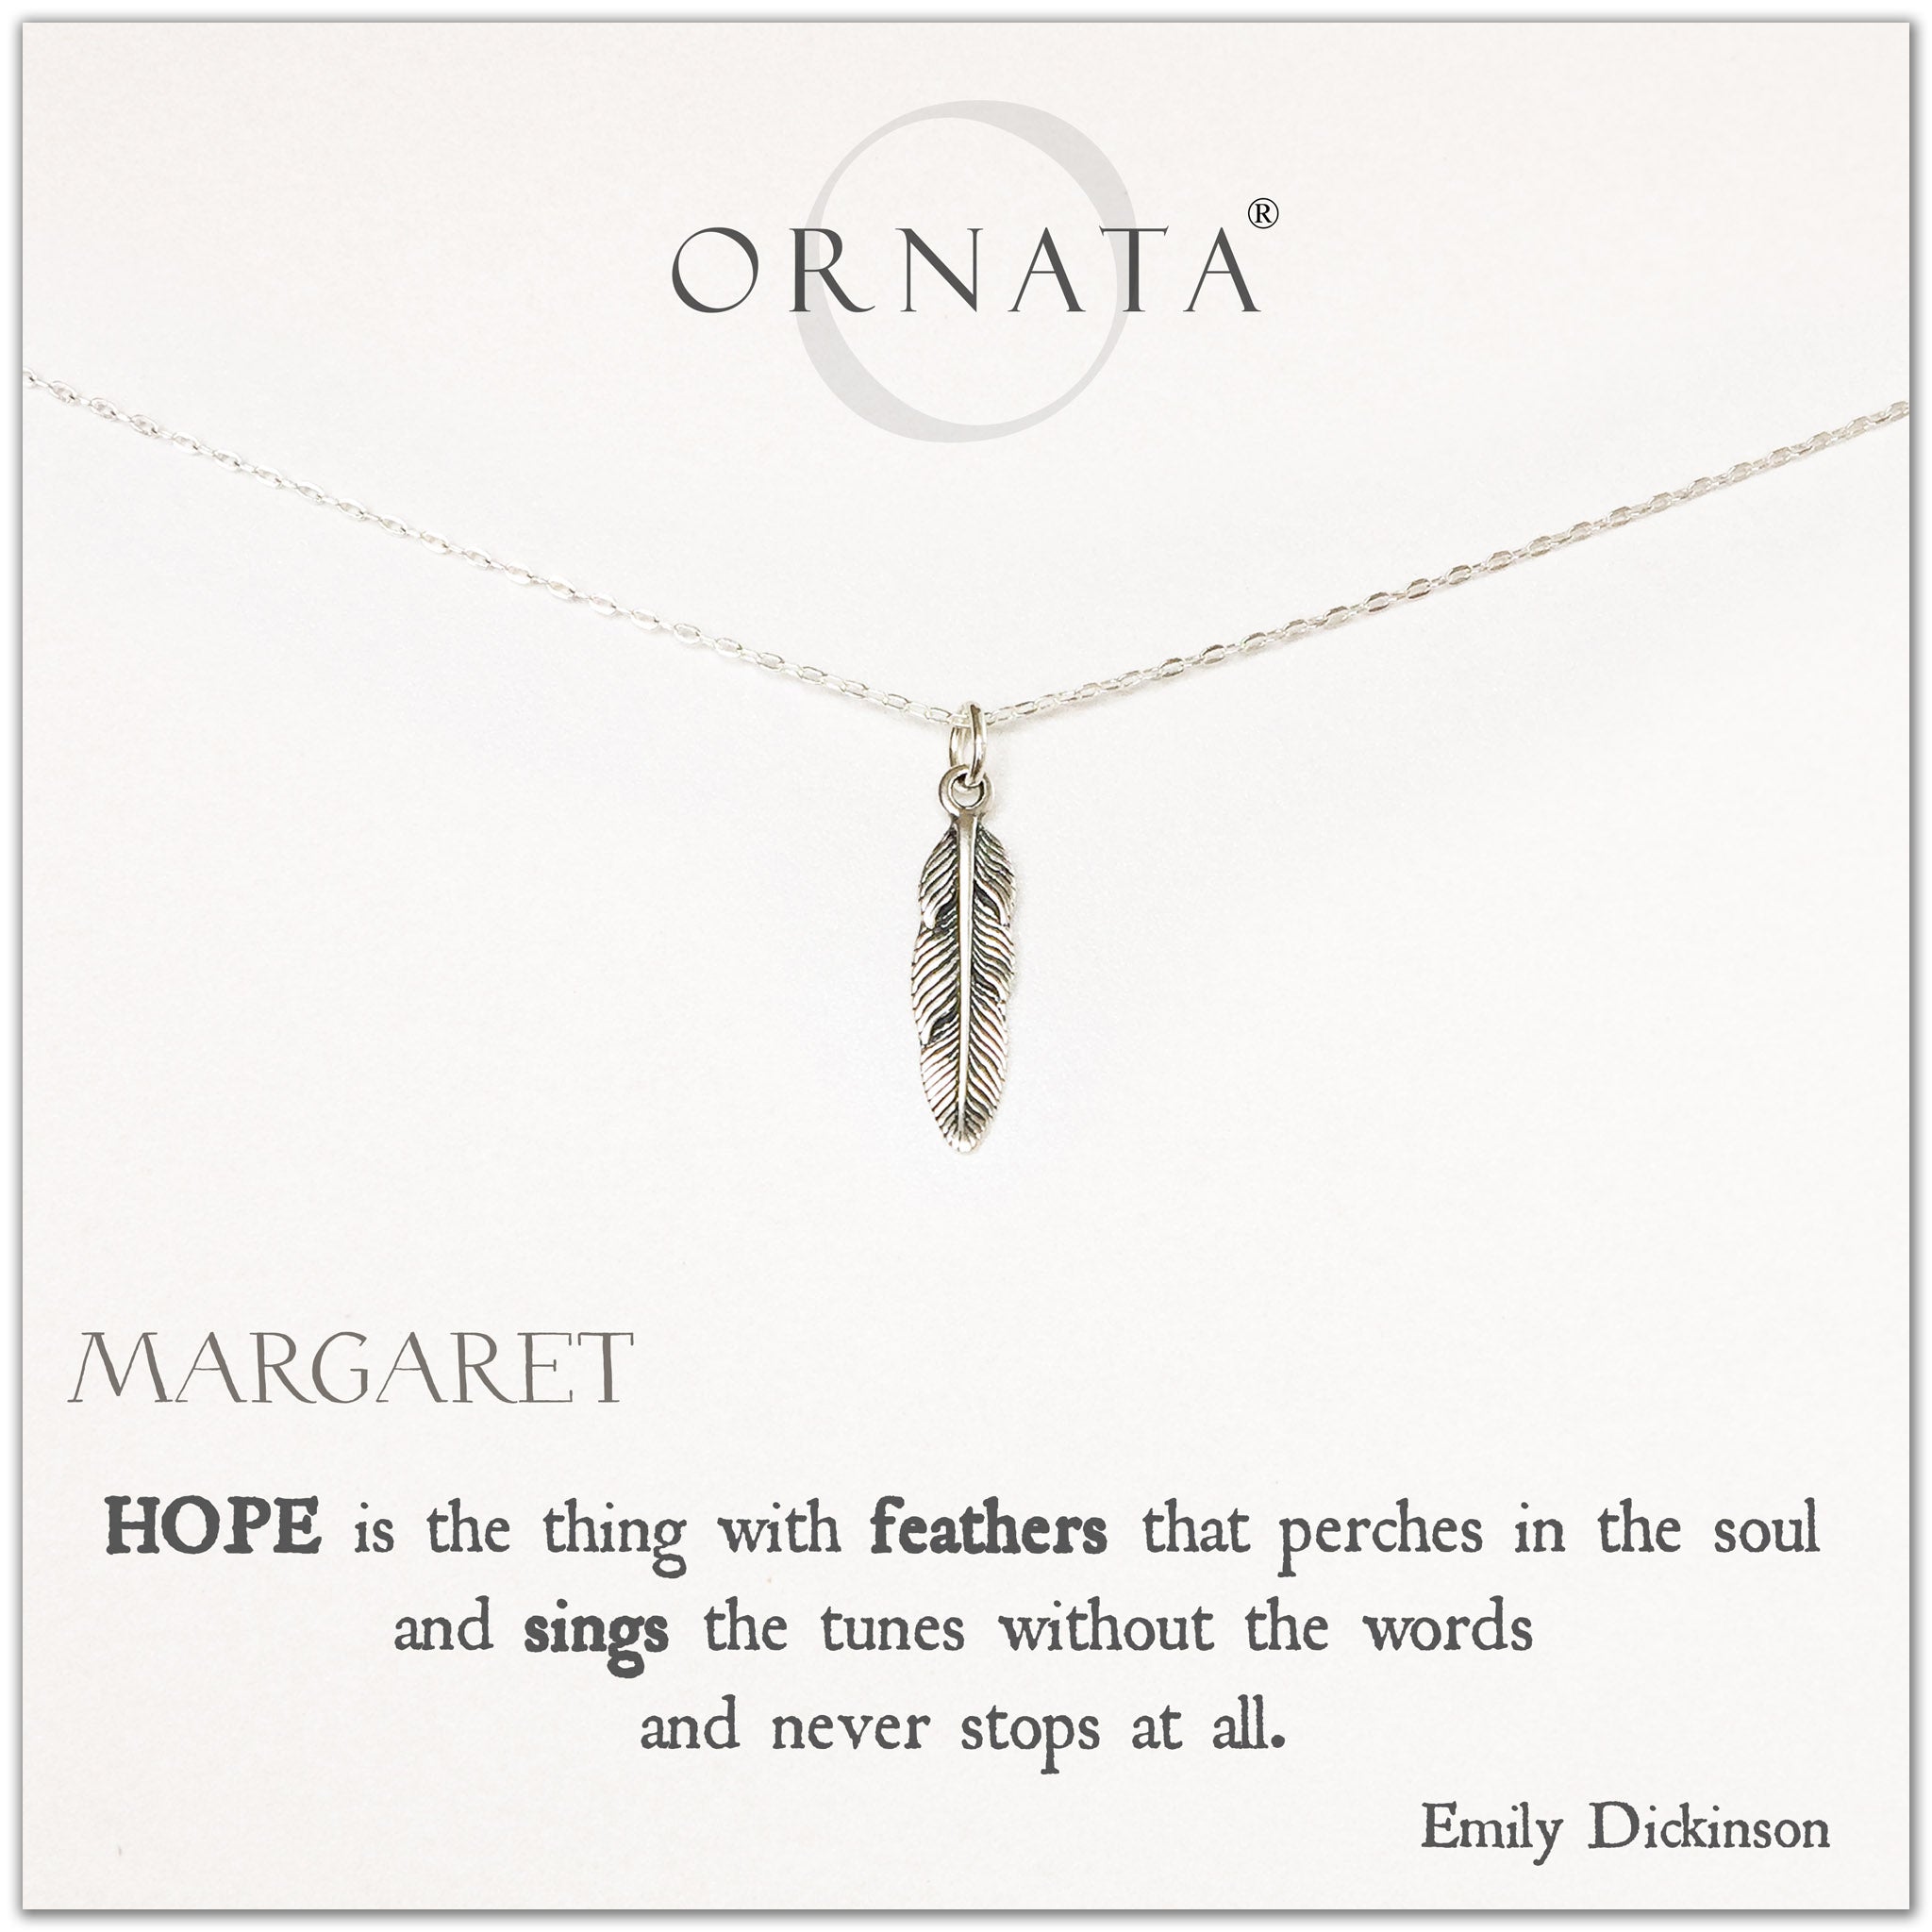 Emily Dickinson Hope Quote necklace - personalized silver feather necklace. Our sterling silver custom jewelry is a perfect gift to symbolize hope with an inspirational quote and feather charm. 